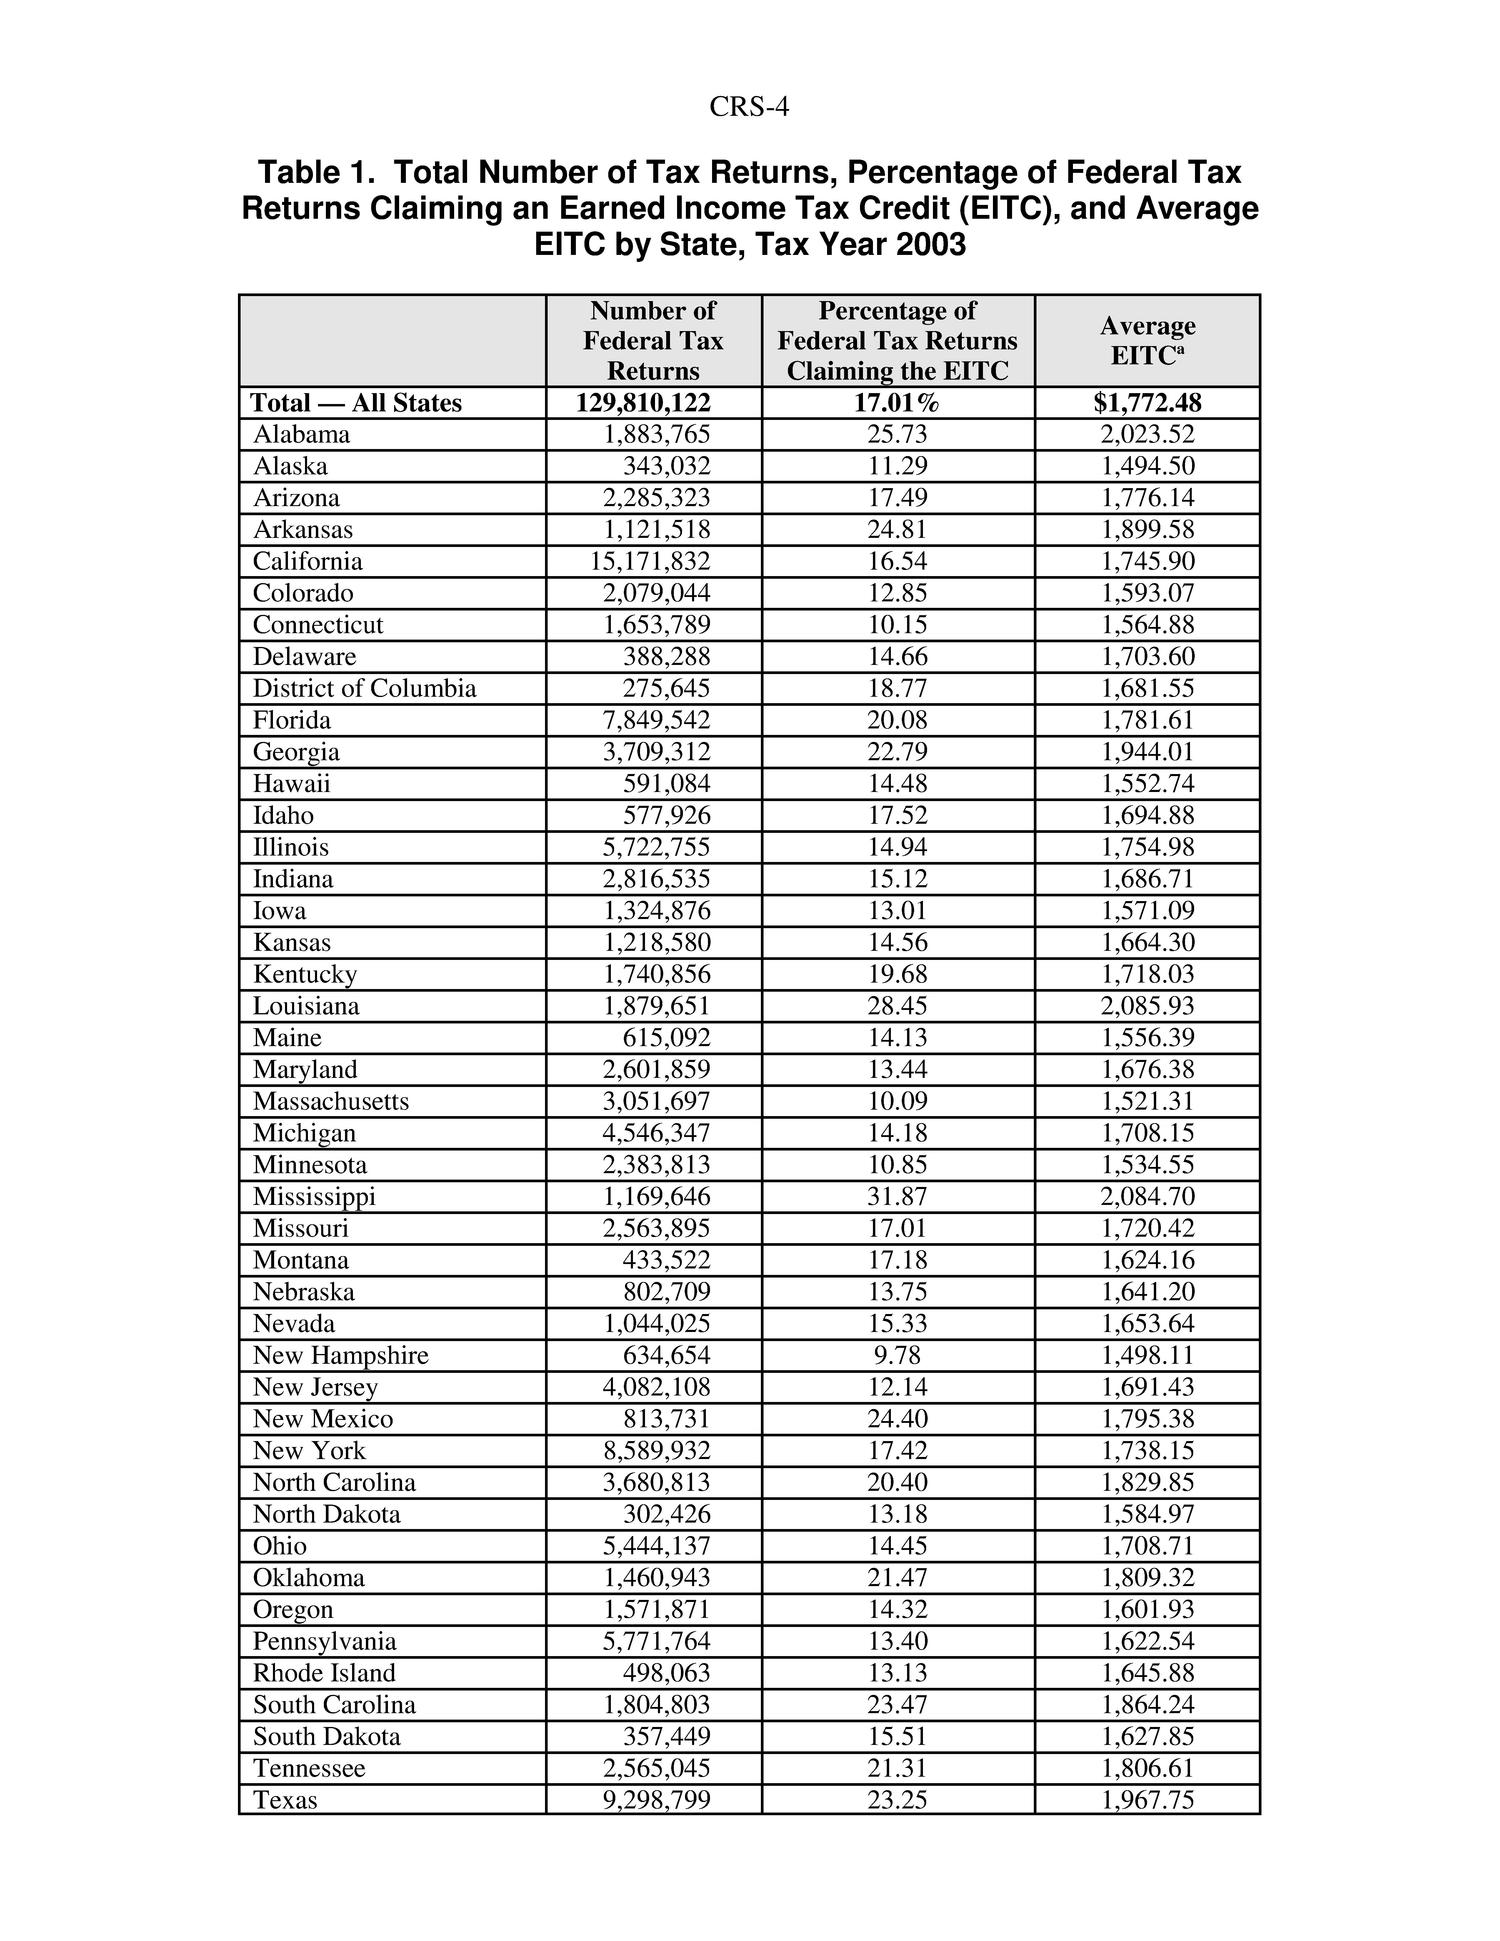 The Earned Income Tax Credit (EITC): Percentage of Total Tax Returns and Credit Amount by State
                                                
                                                    [Sequence #]: 4 of 5
                                                